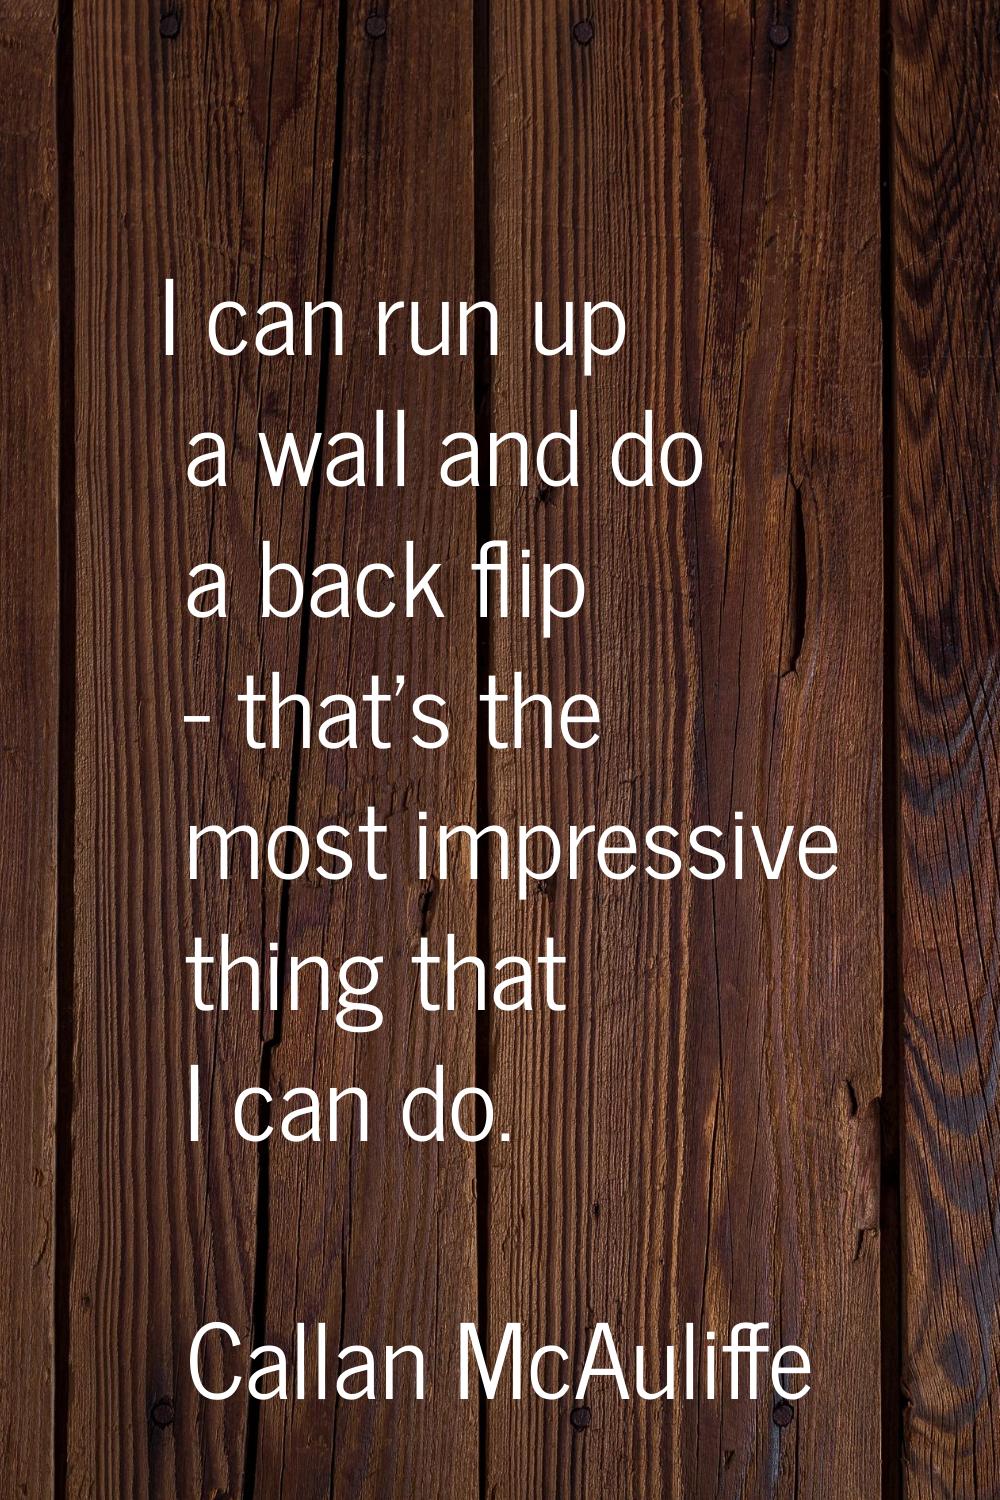 I can run up a wall and do a back flip - that's the most impressive thing that I can do.